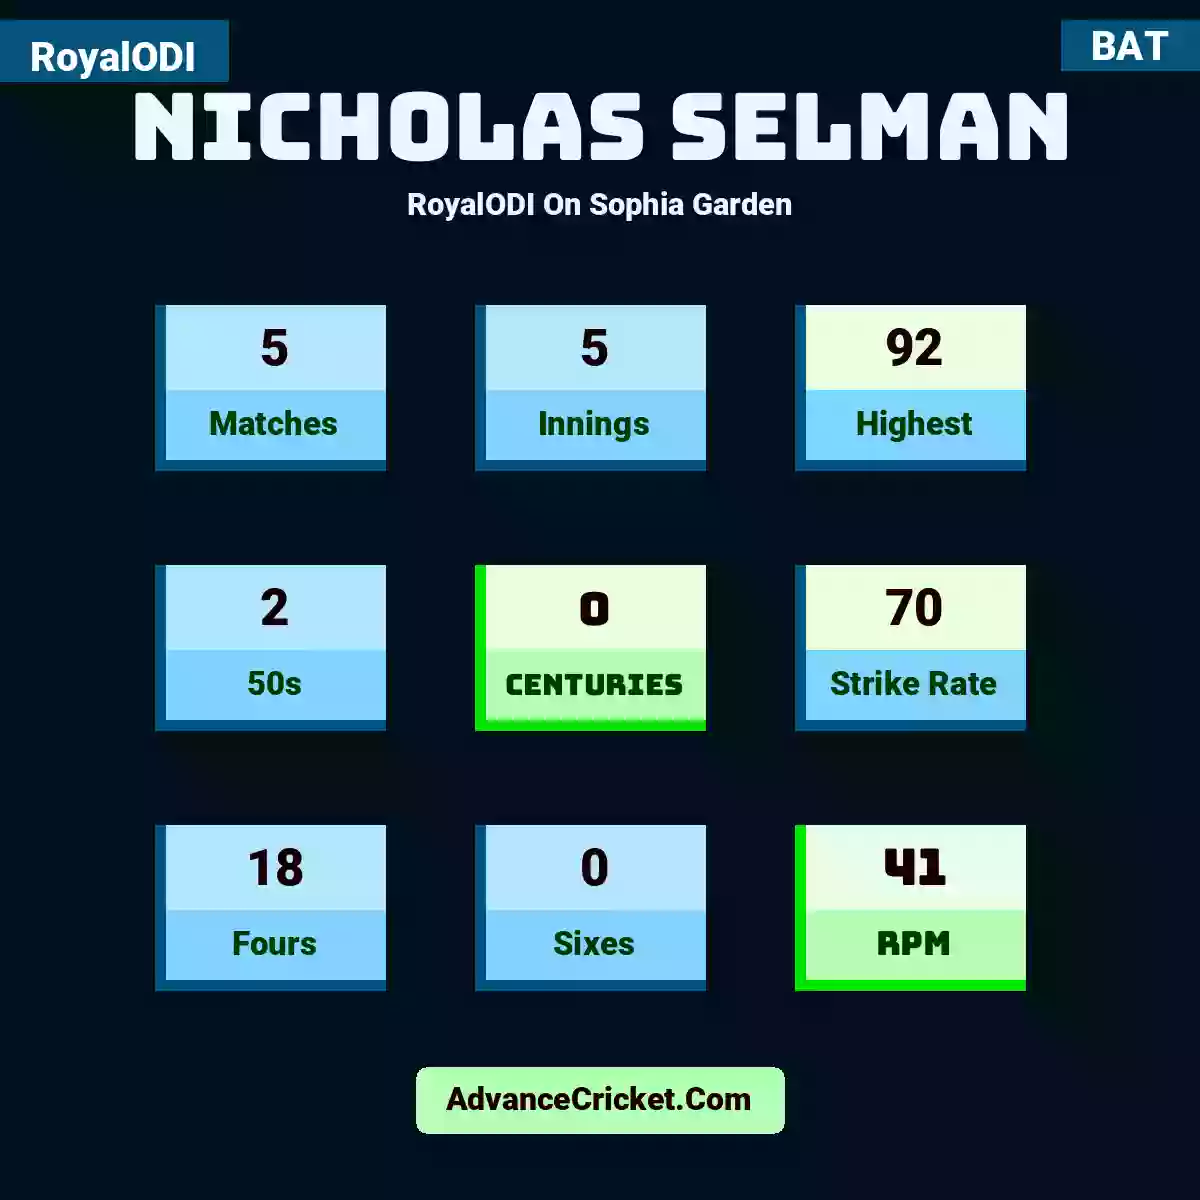 Nicholas Selman RoyalODI  On Sophia Garden, Nicholas Selman played 5 matches, scored 92 runs as highest, 2 half-centuries, and 0 centuries, with a strike rate of 70. N.Selman hit 18 fours and 0 sixes, with an RPM of 41.